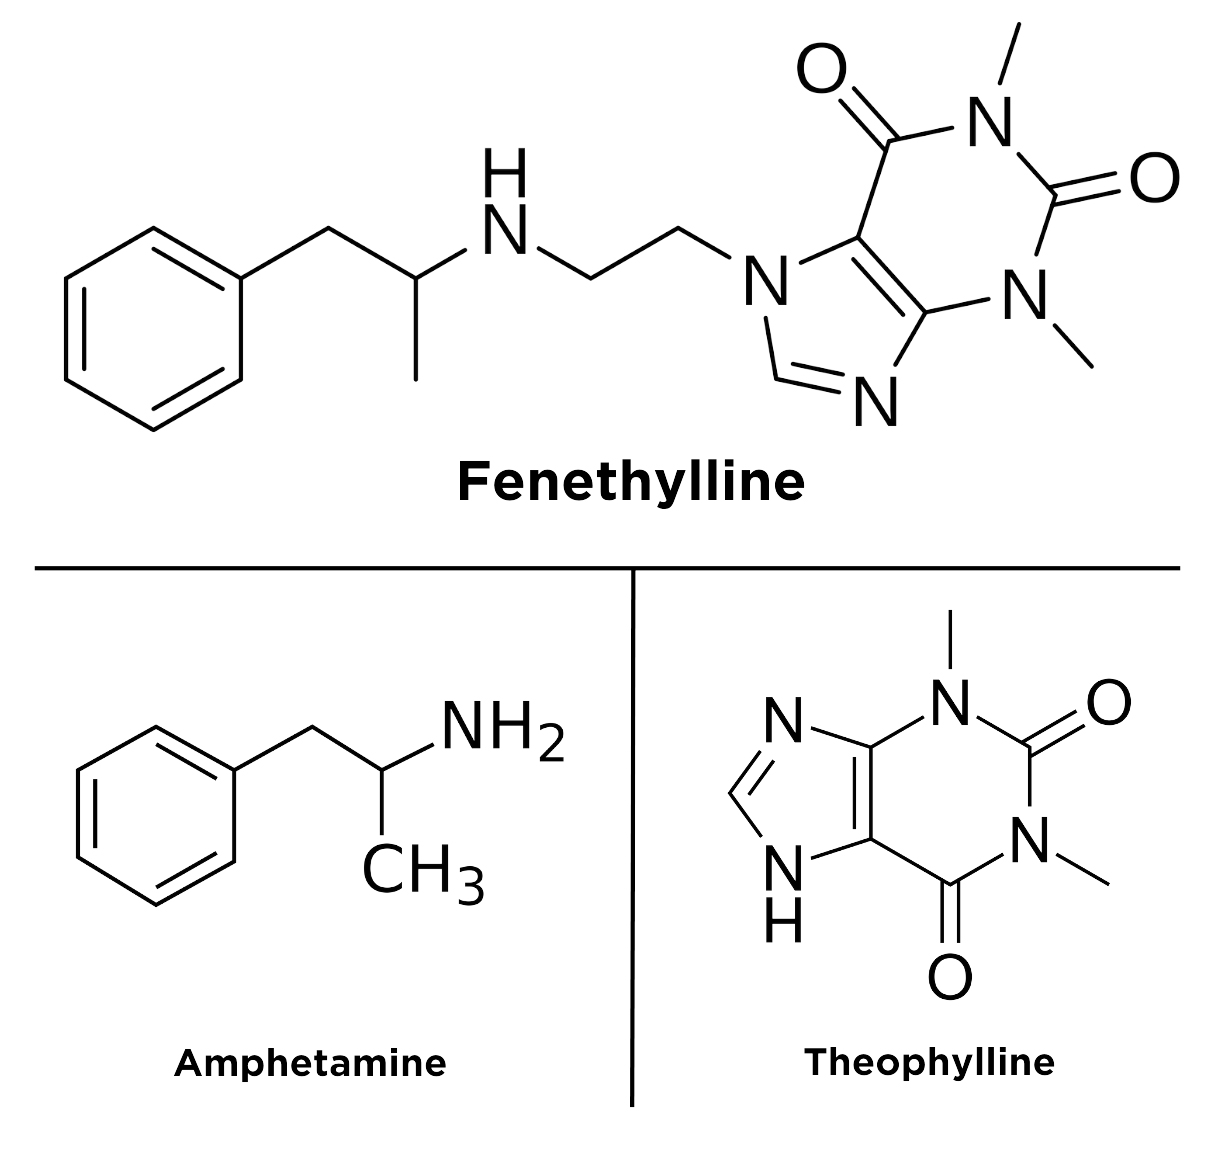 Chemical components of Amphetamine, Theophylline and Fenethylline.